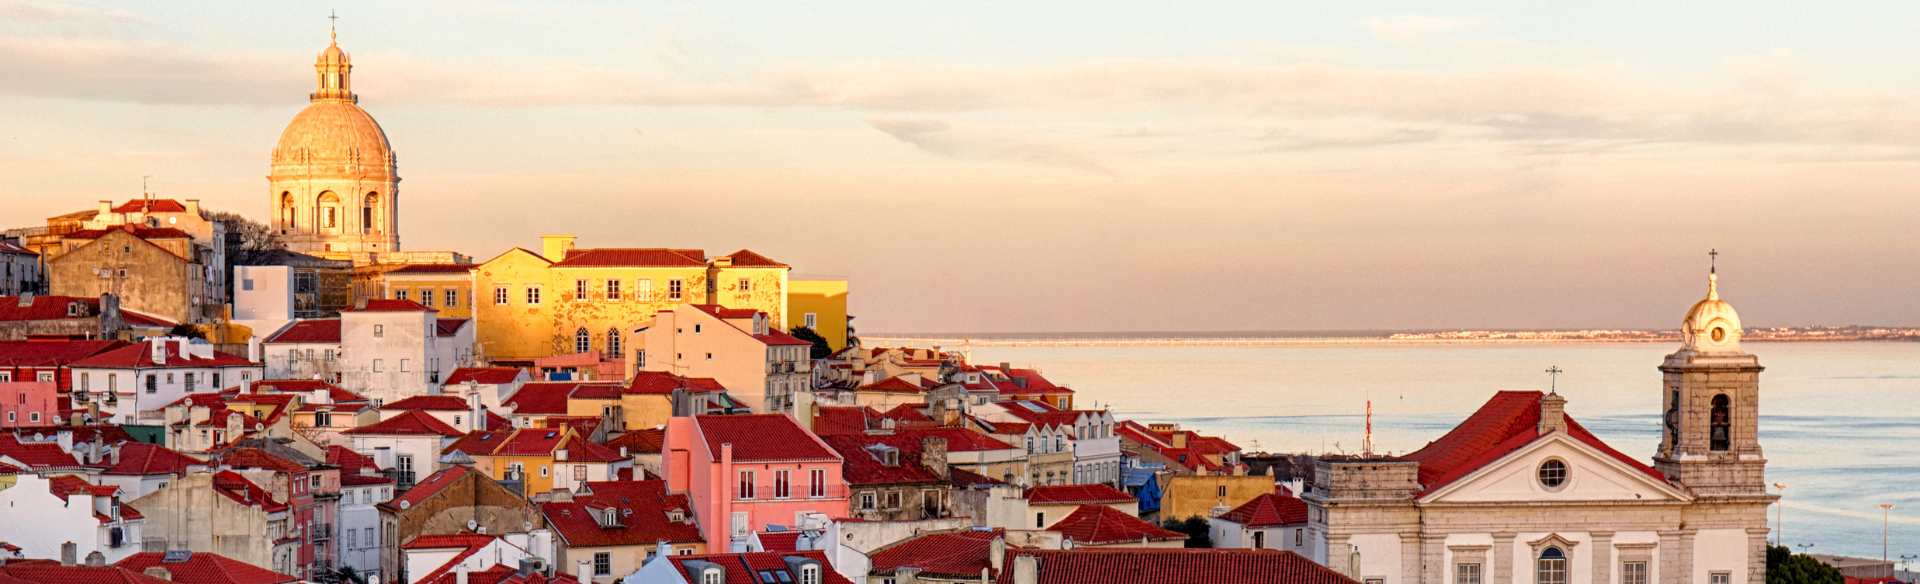 The colorful skyline of a Portuguese city at sunset with the sea in the distance